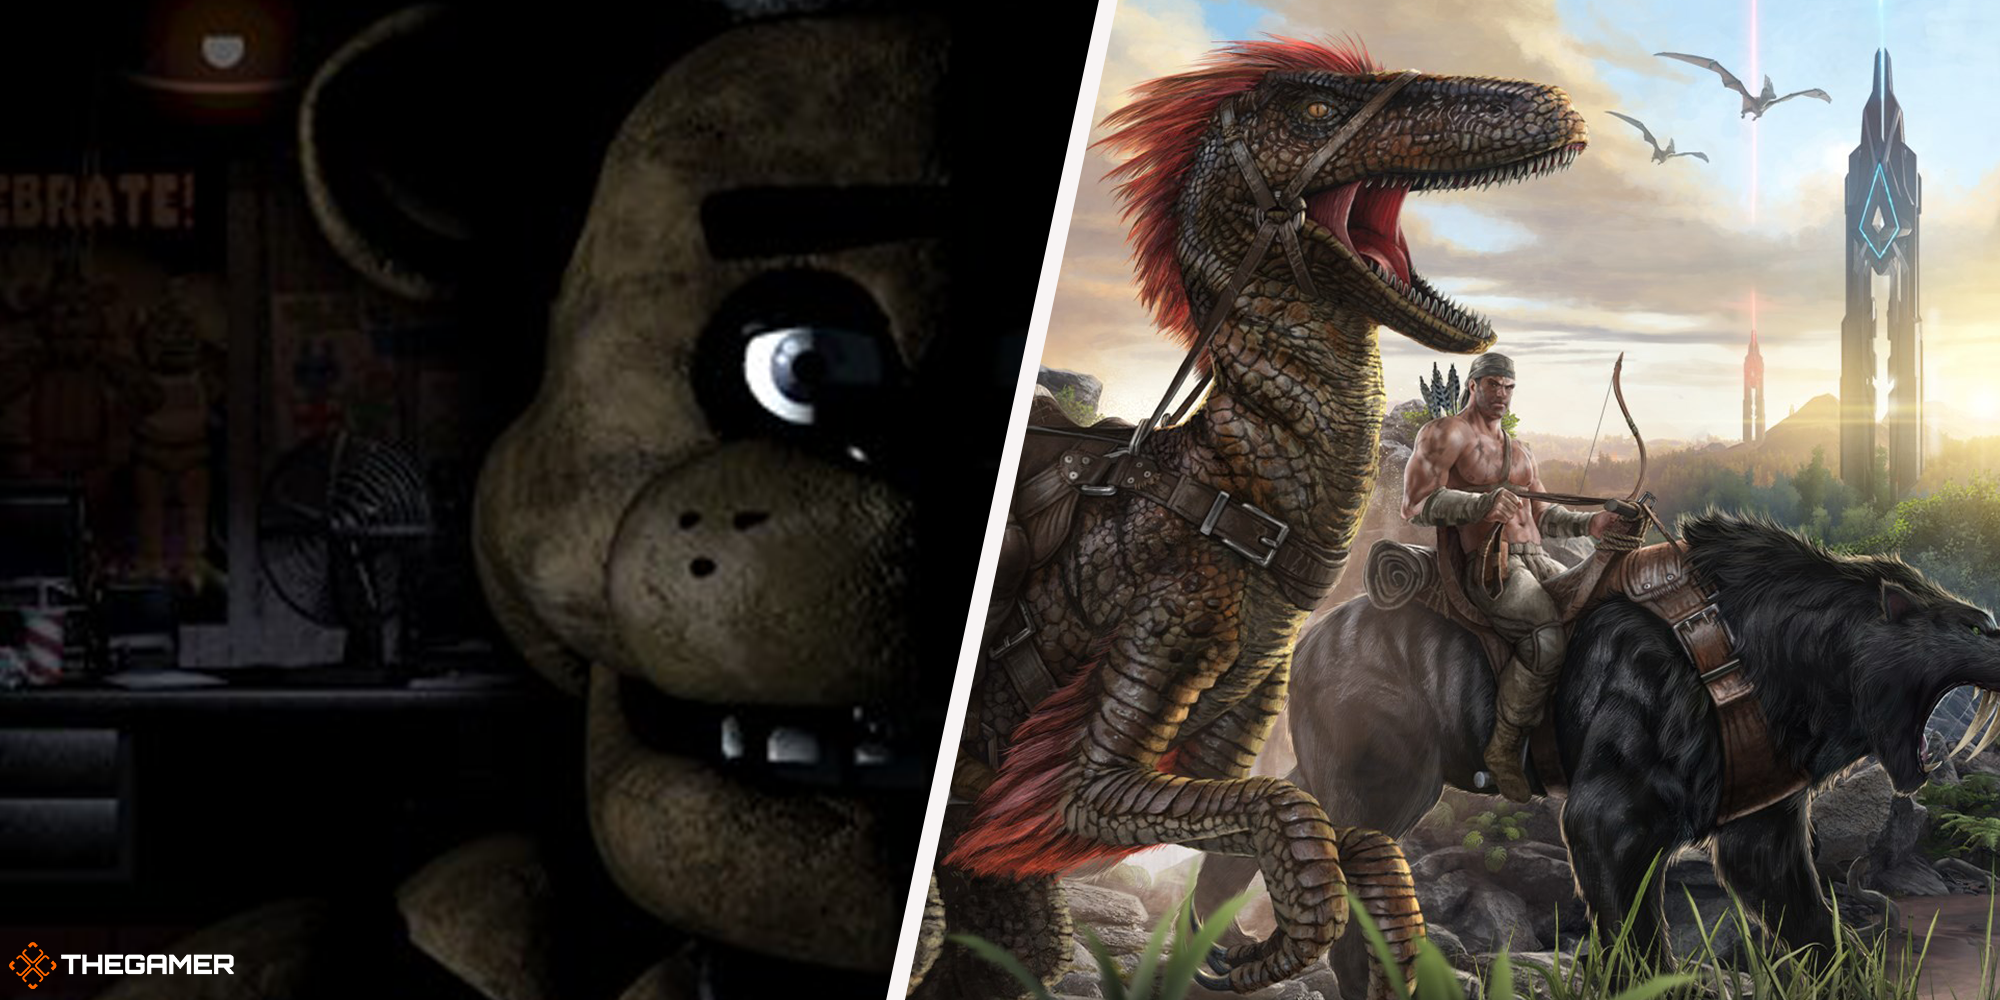 Video game promo images - ark survival evolved on right, five nights at freddys